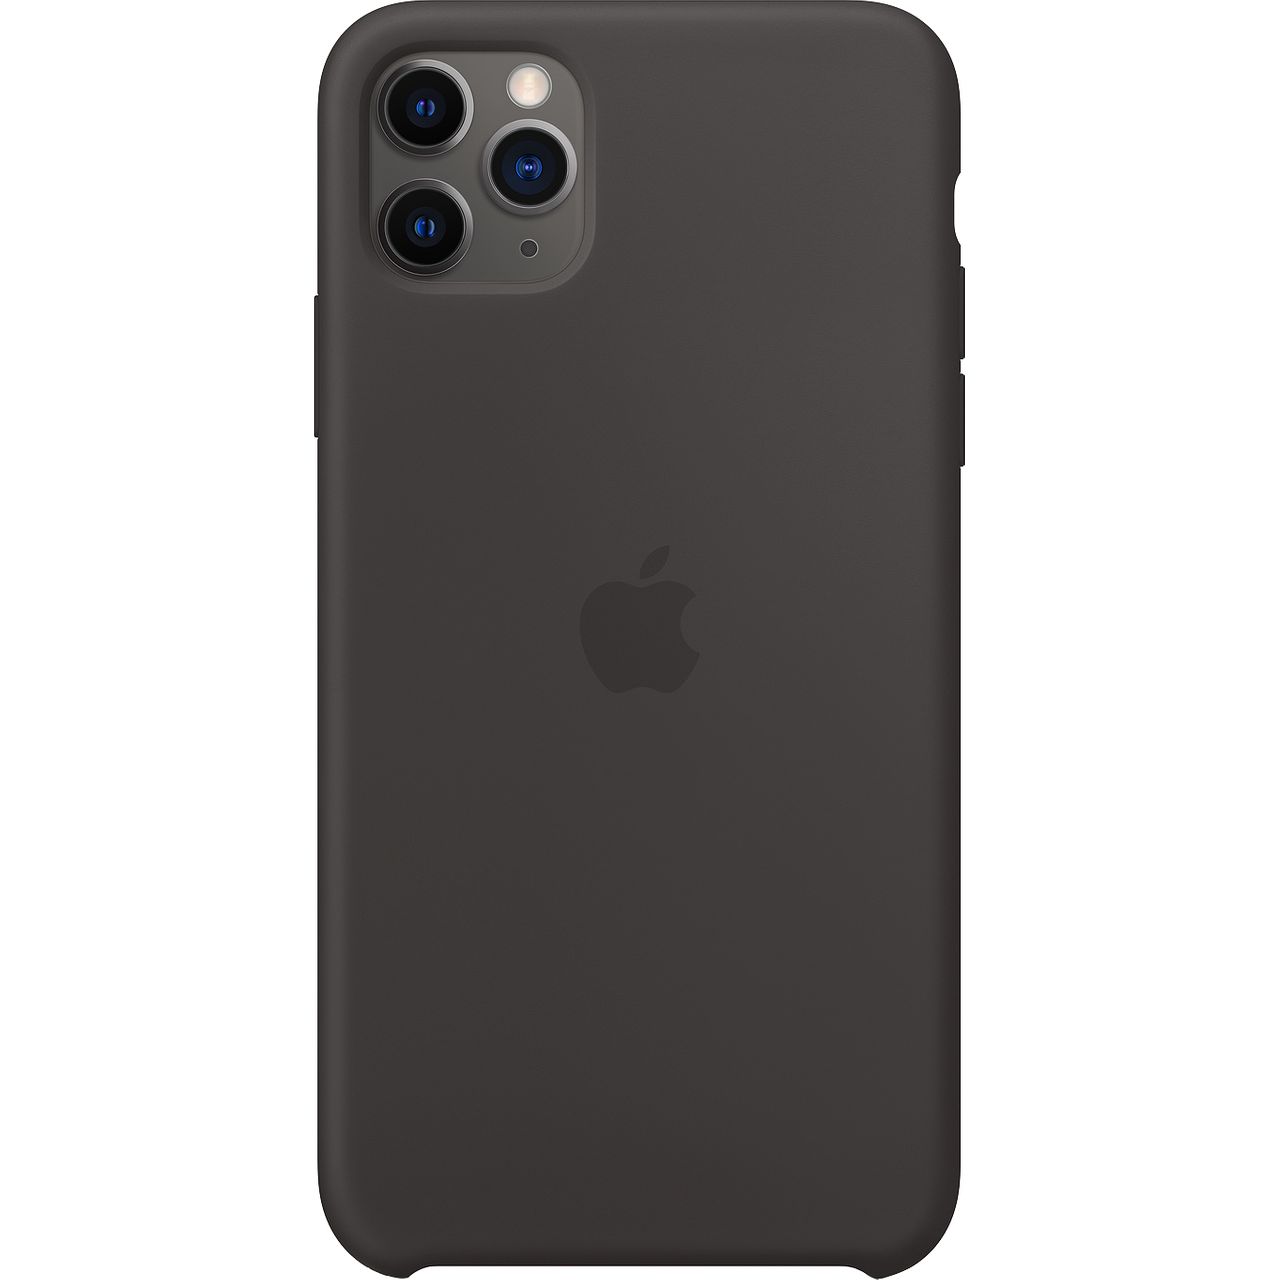 Apple iPhone 11 Pro Max Silicone Case Review